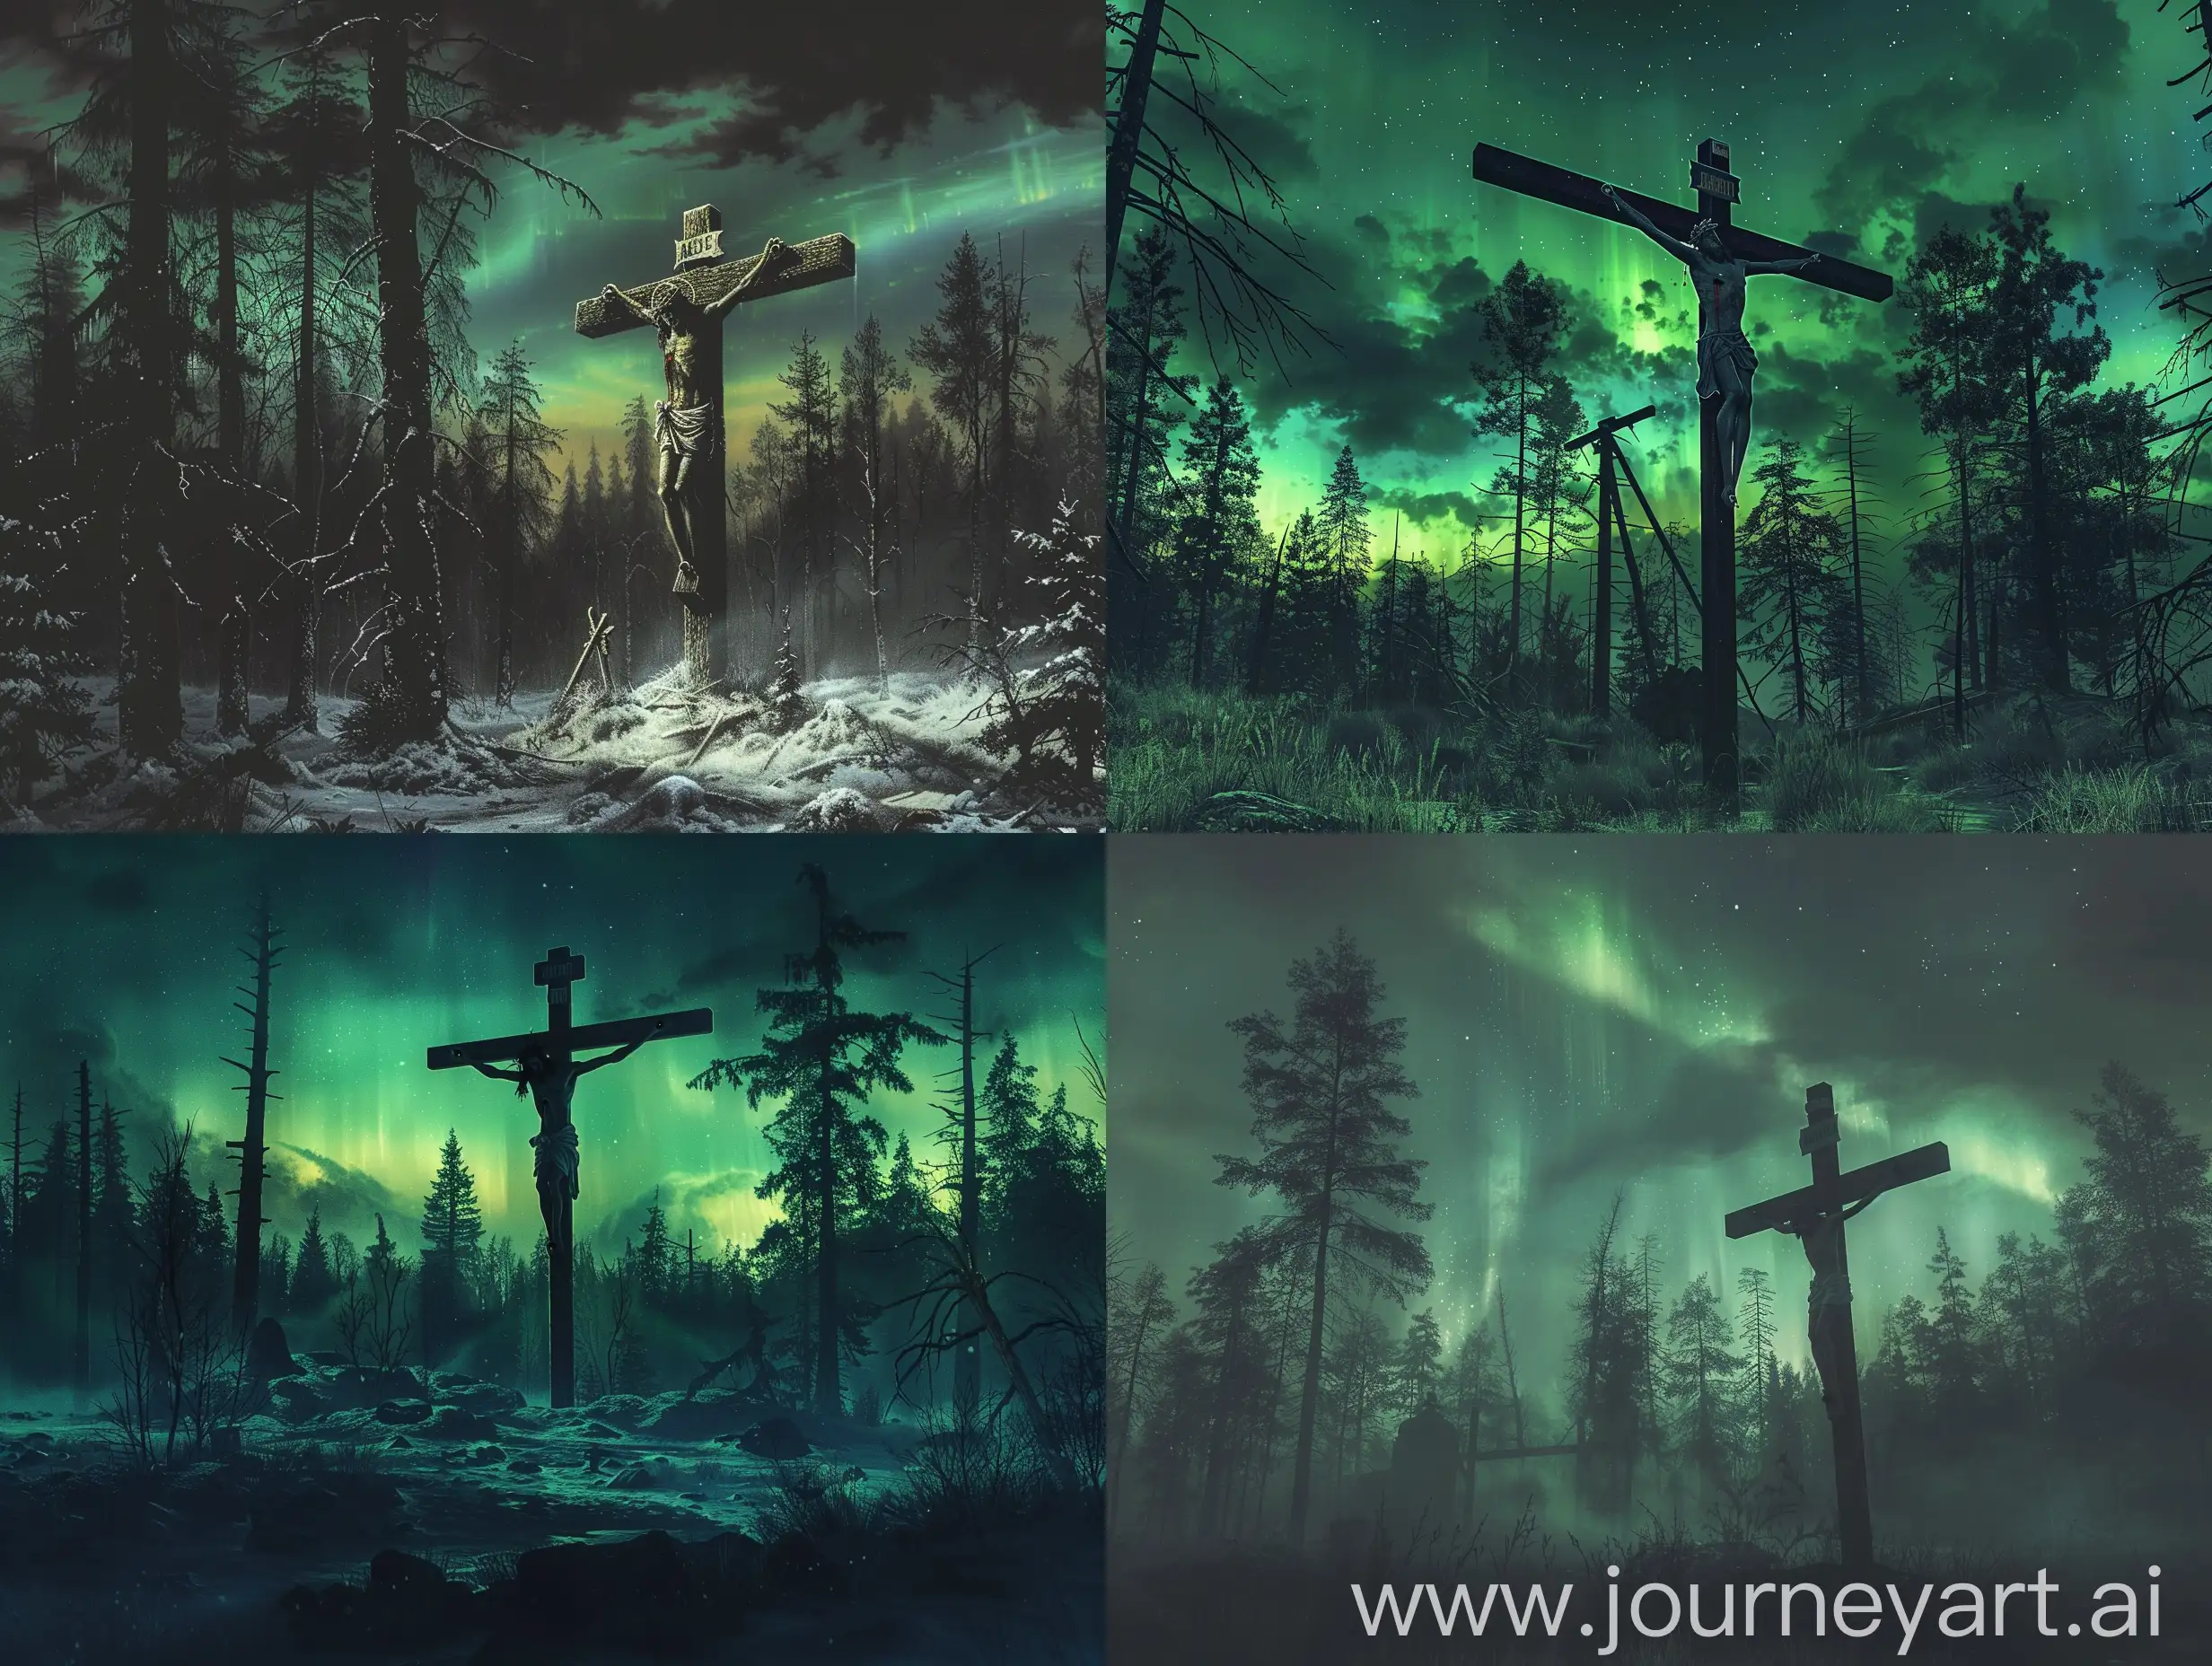 Medieval-Russian-Crucifixion-with-Aurora-Borealis